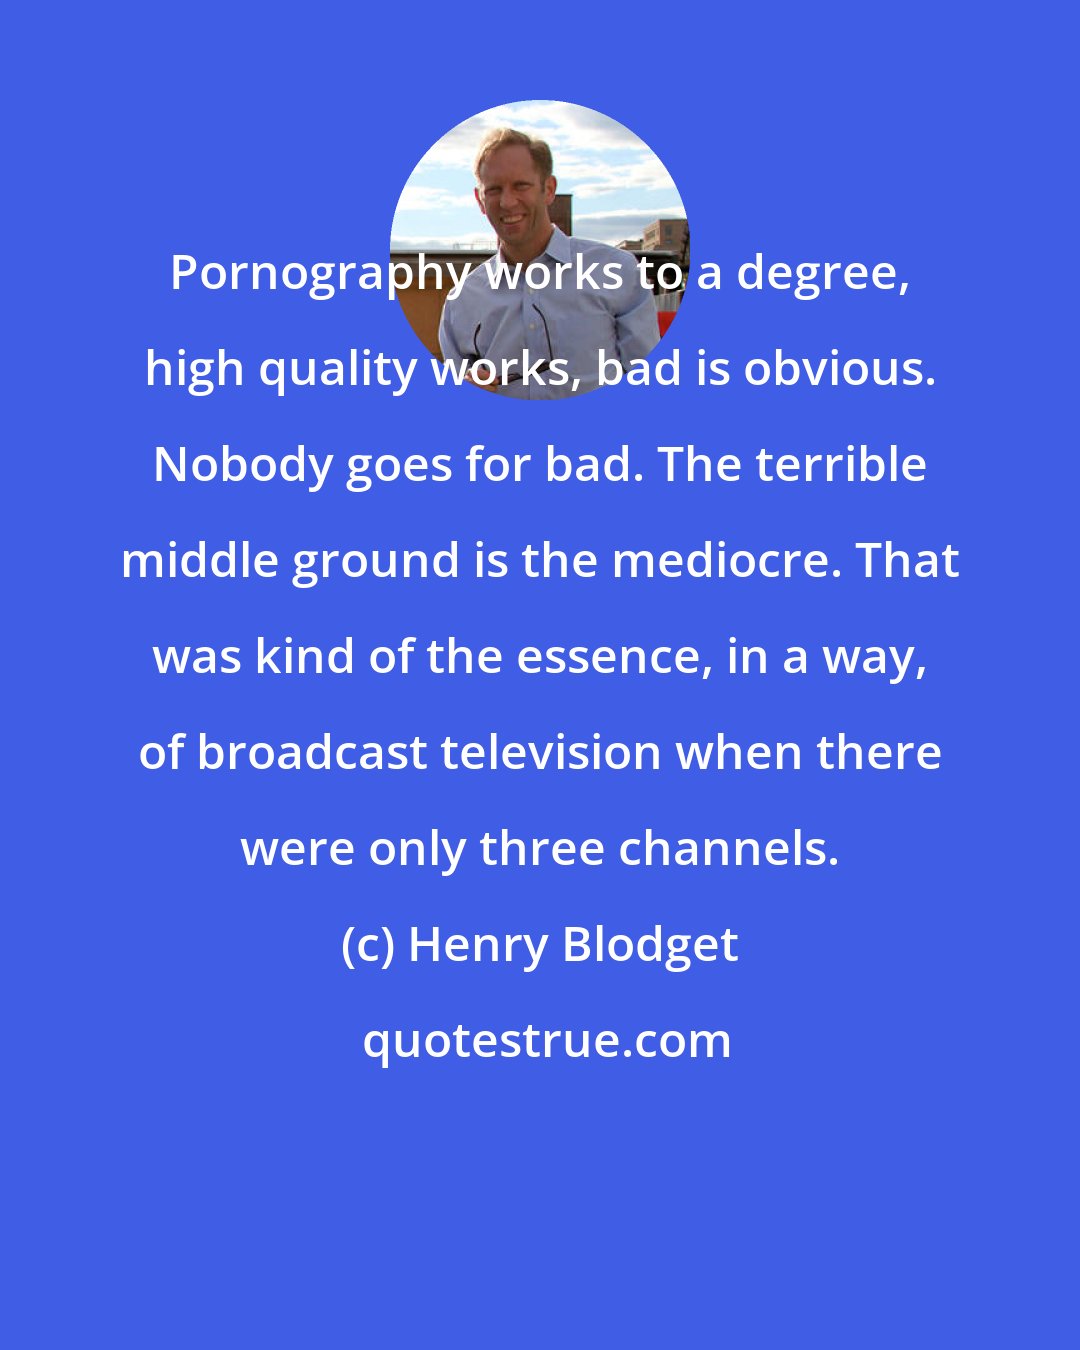 Henry Blodget: Pornography works to a degree, high quality works, bad is obvious. Nobody goes for bad. The terrible middle ground is the mediocre. That was kind of the essence, in a way, of broadcast television when there were only three channels.